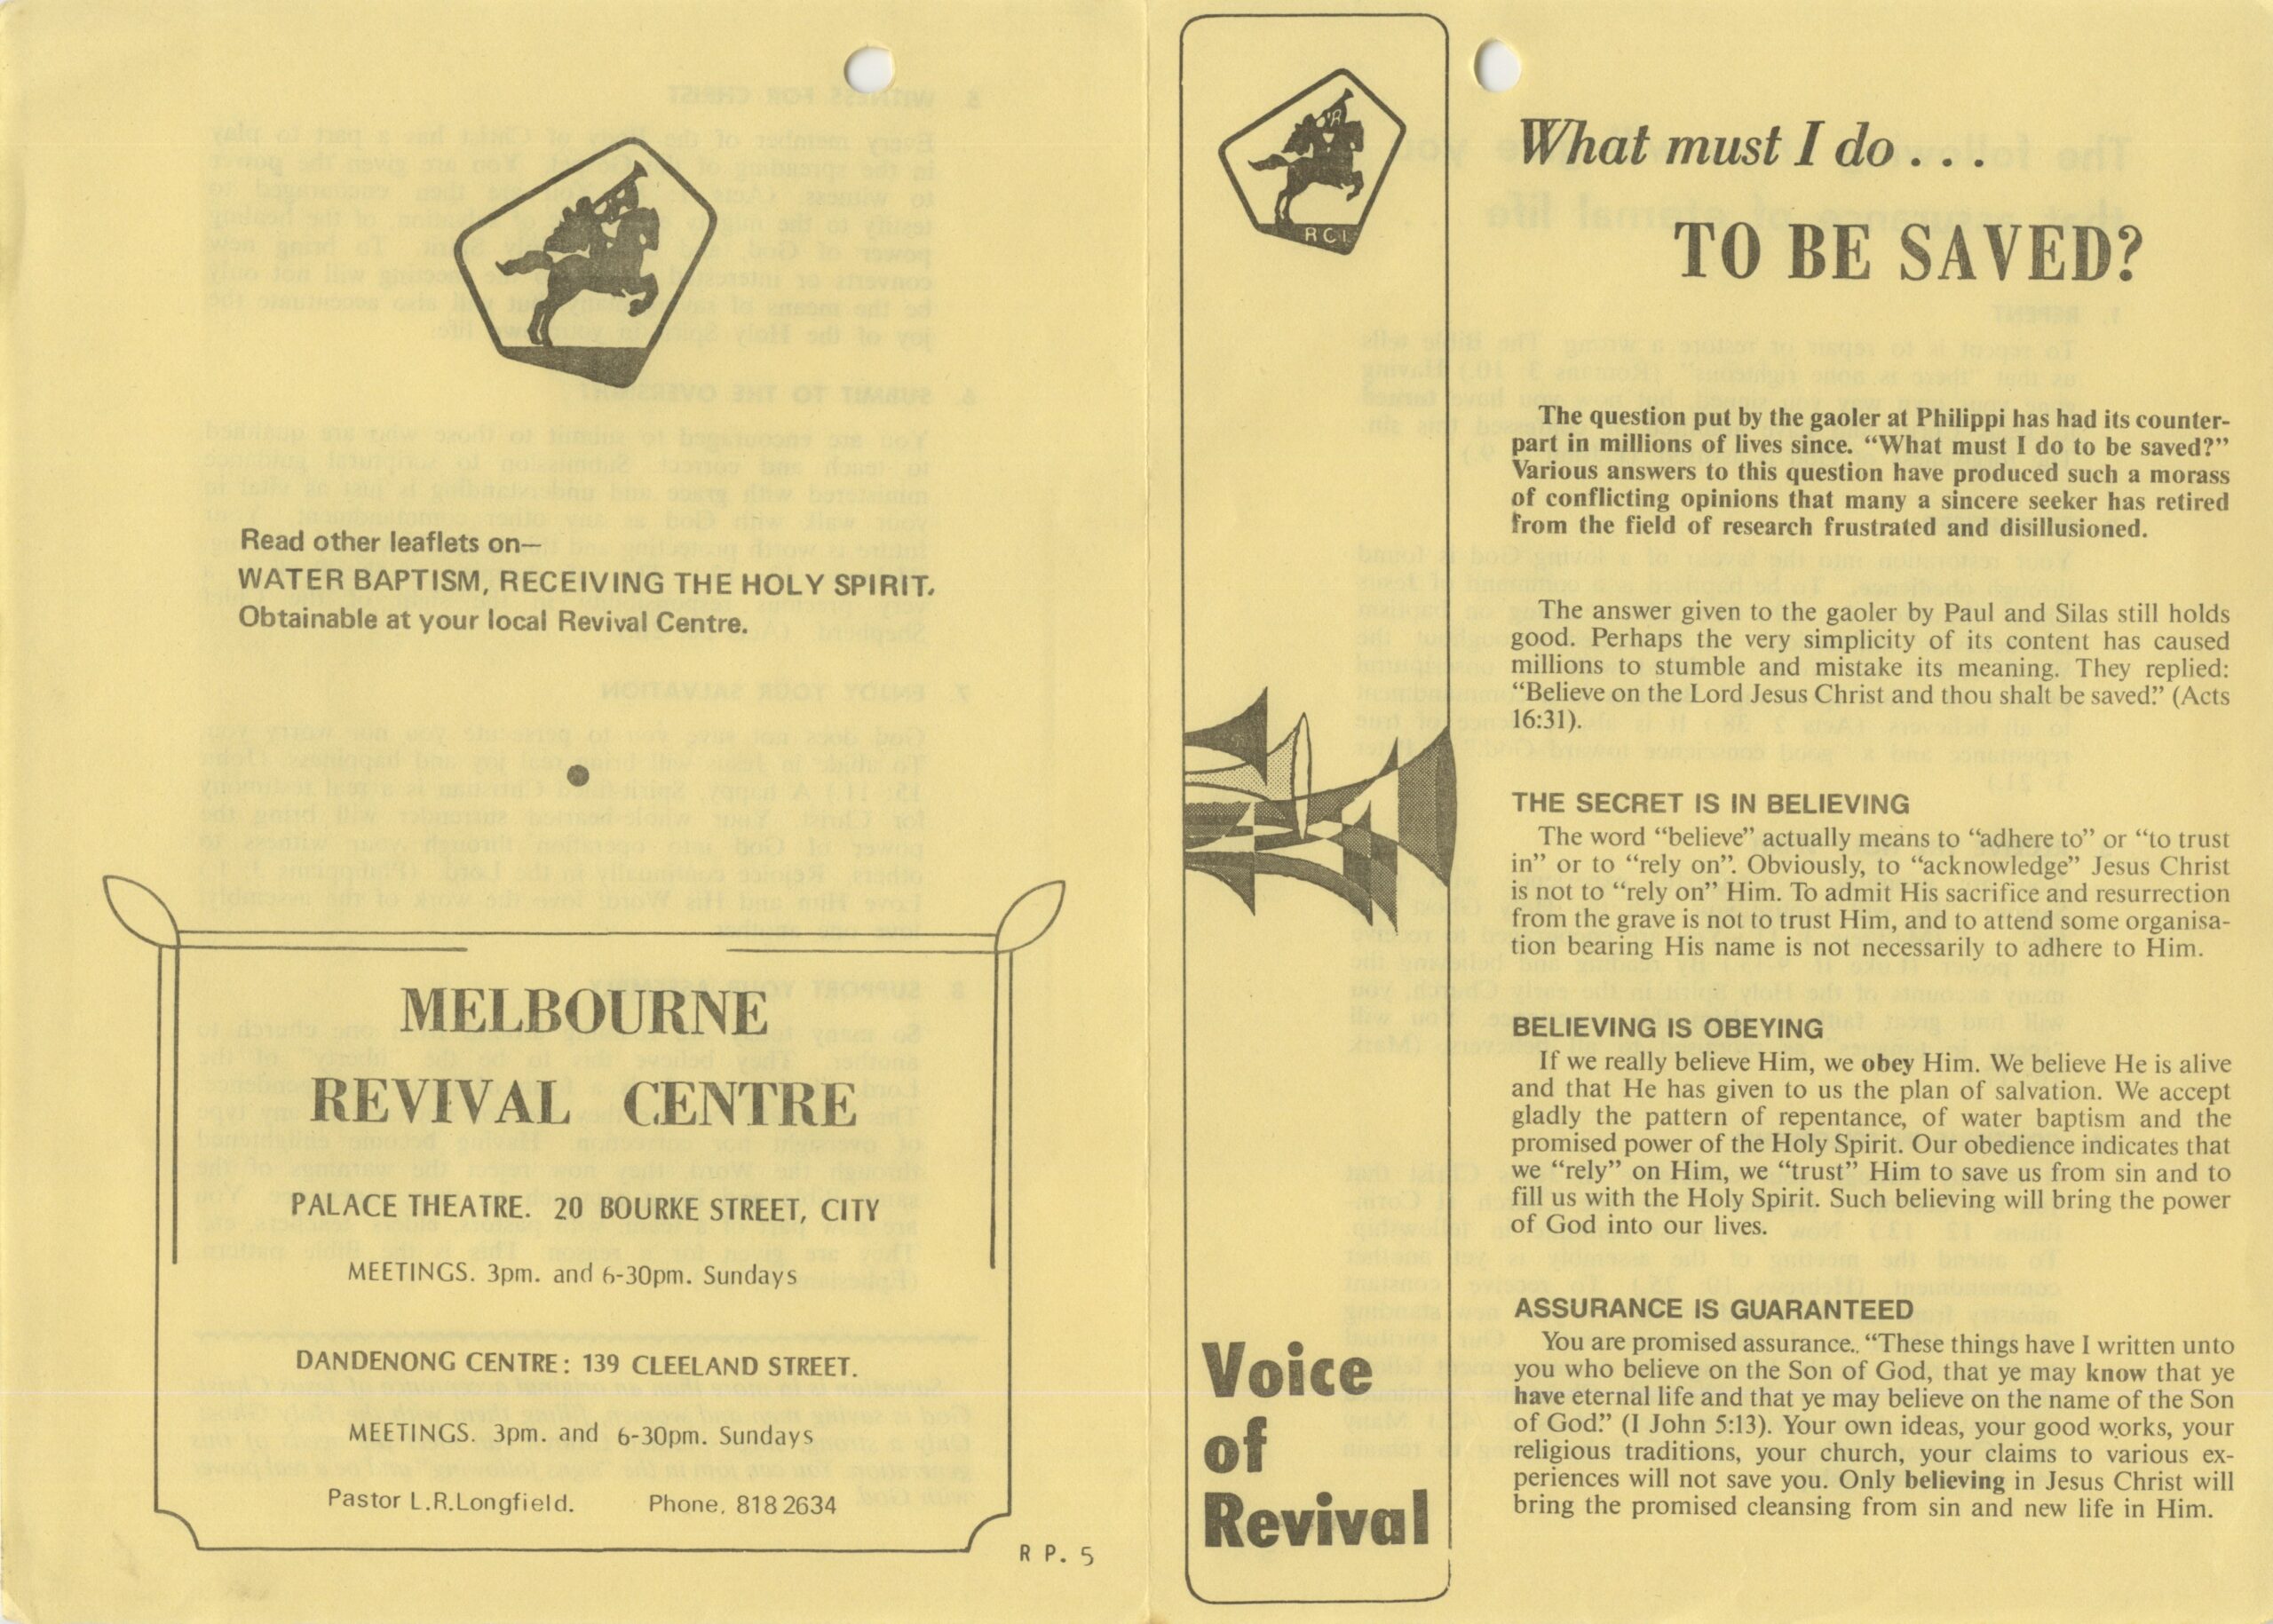 Front and back cover of an old pale yellow Revival Centres booklet entitled "What must I do to be saved?"